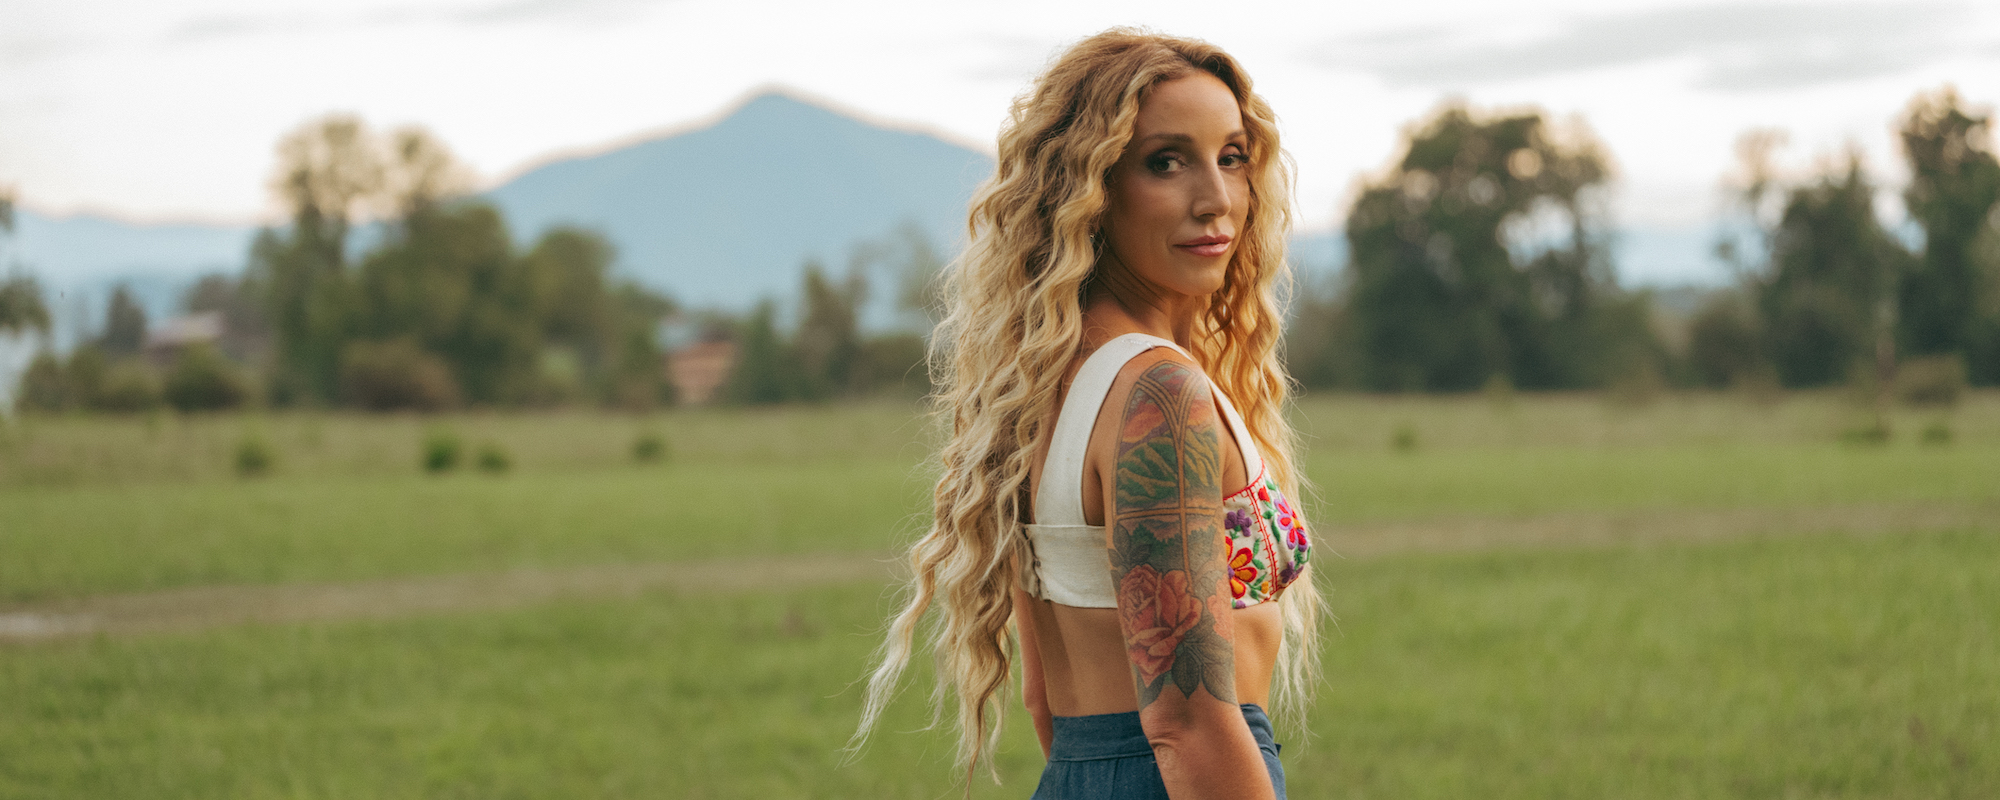 Ashley Monroe Soars Into a New Era with New Single “Over Everything”